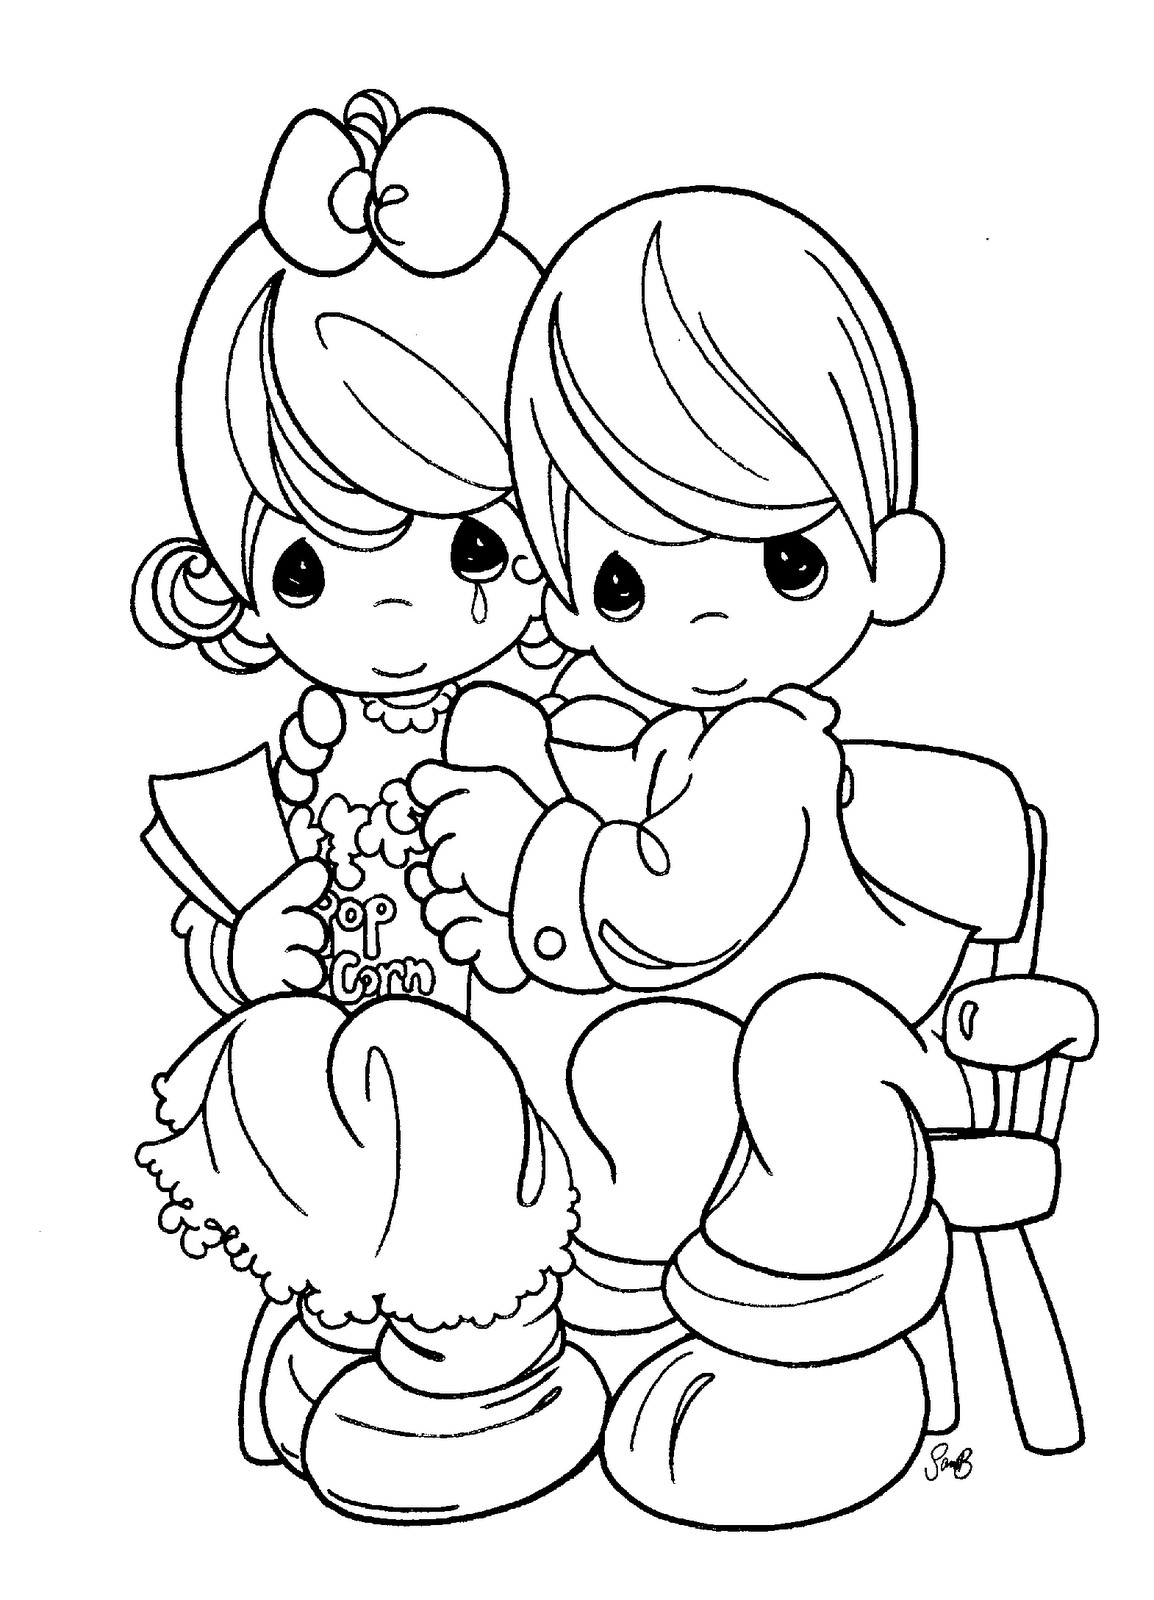 Precious Moments Printable Coloring Pages
 Precious Moments for Love Coloring Pages Disney